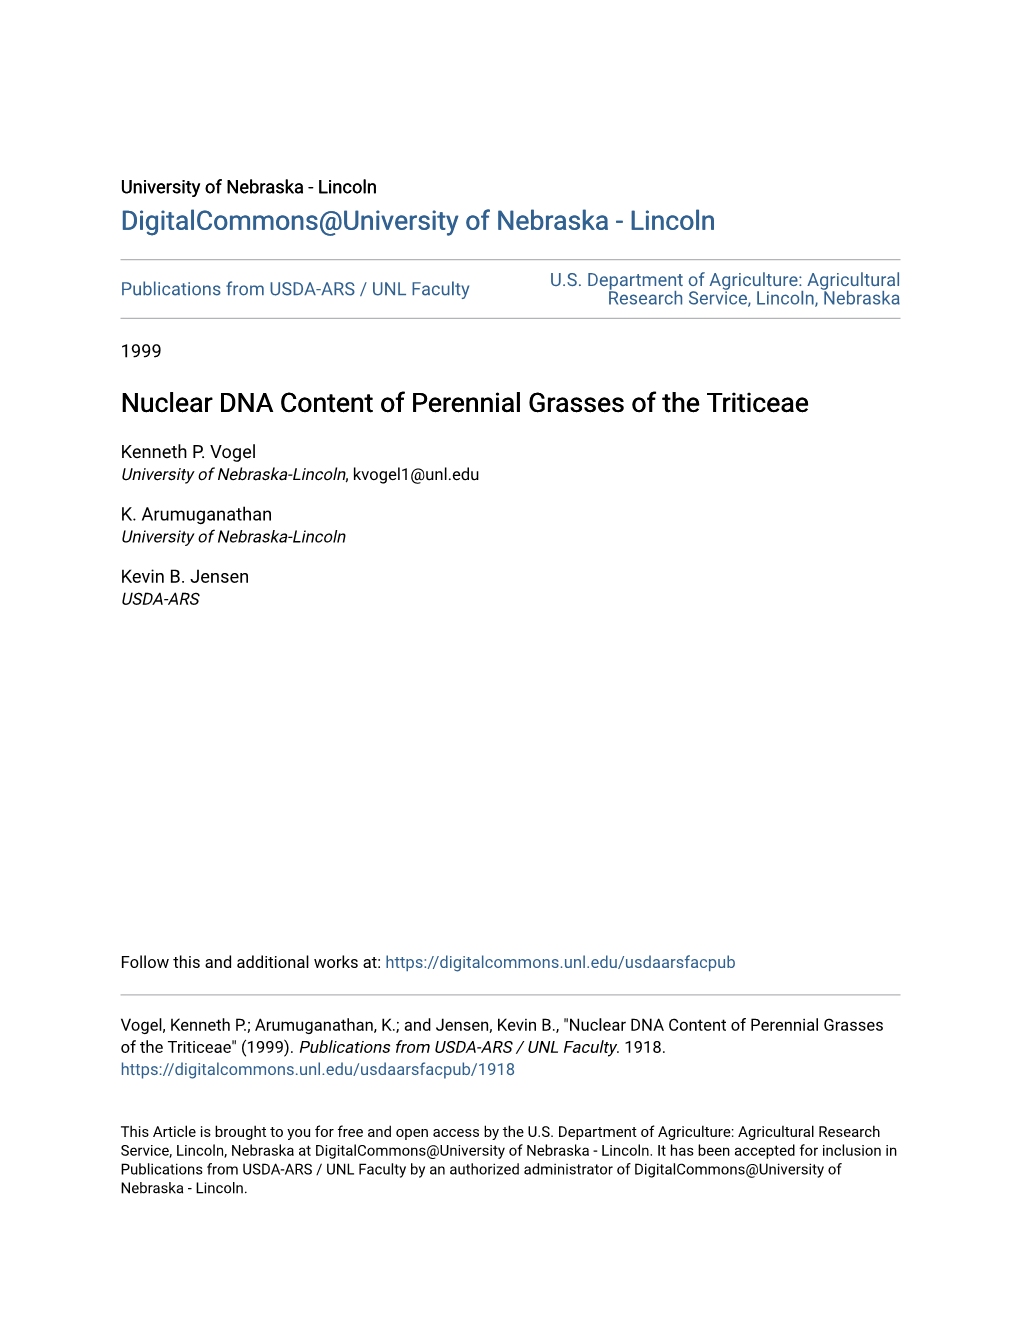 Nuclear DNA Content of Perennial Grasses of the Triticeae